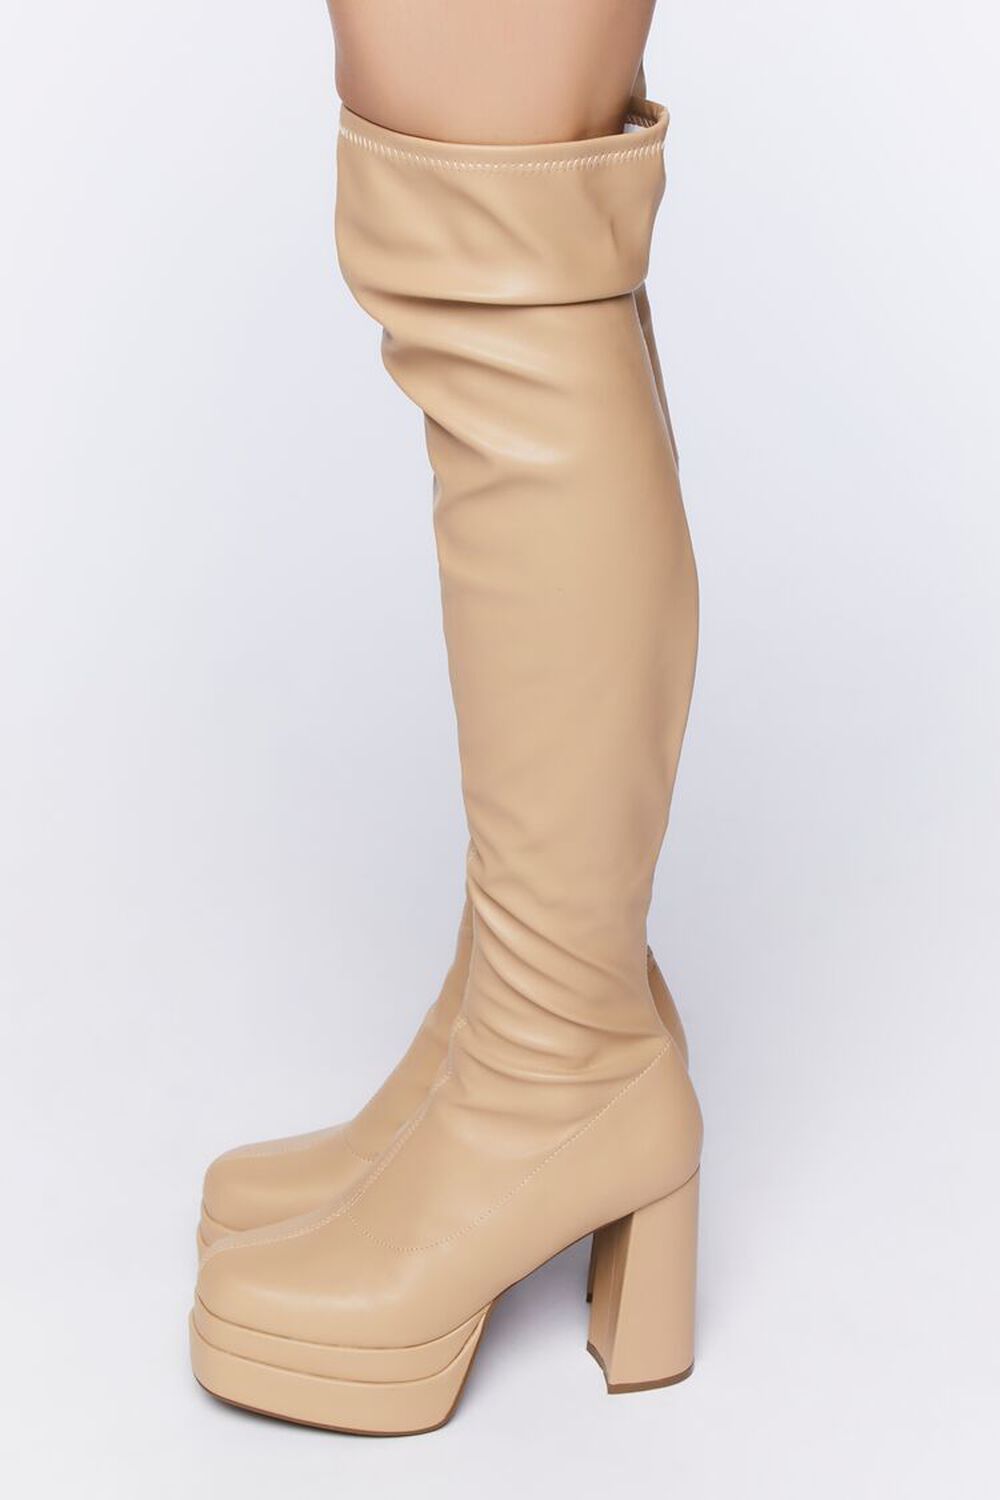 Faux Leather Over-The-Knee Platform Boots, image 2